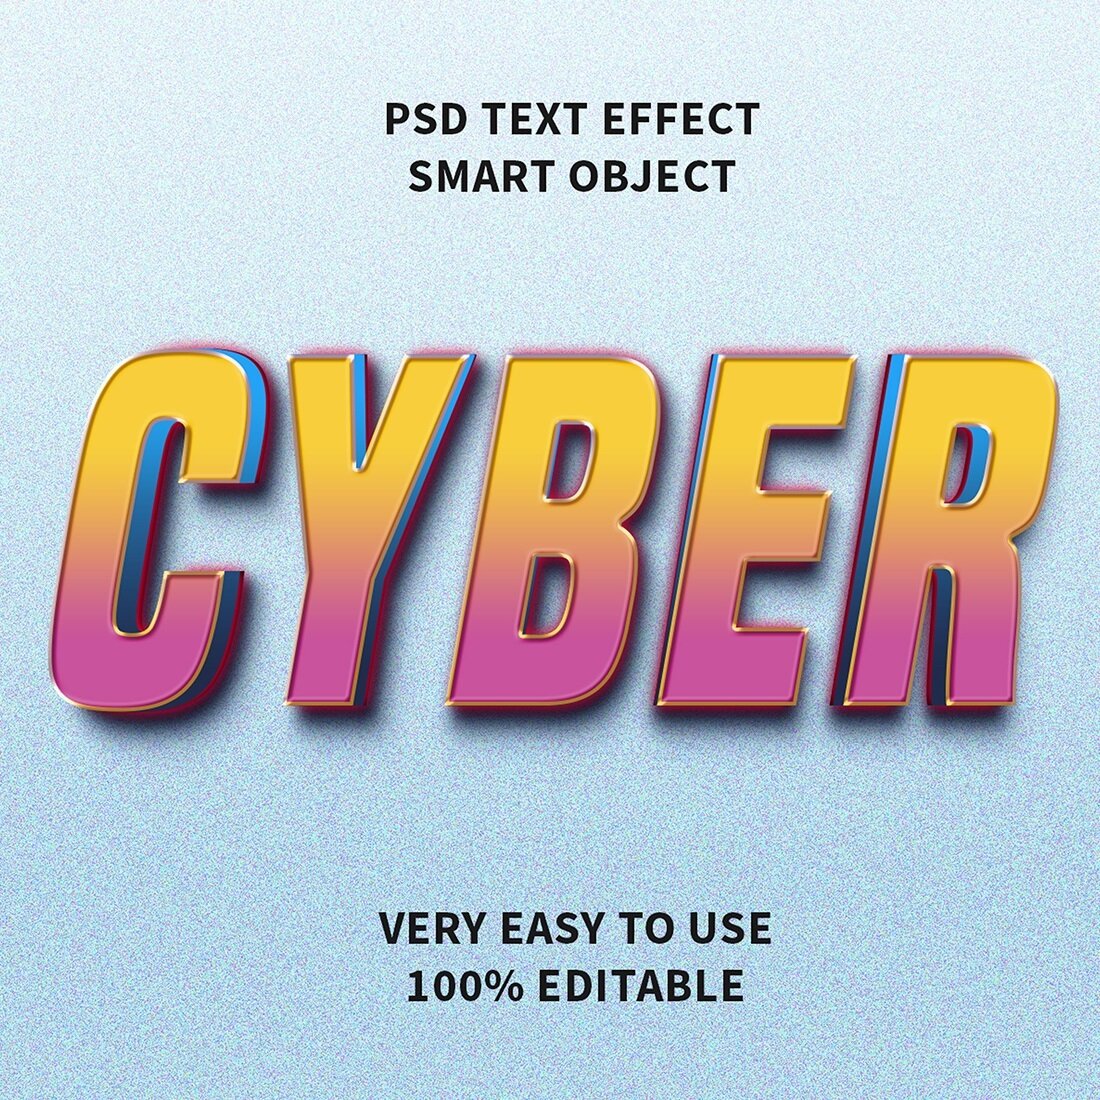 Cyber Editable 3D text Effect PSD preview image.